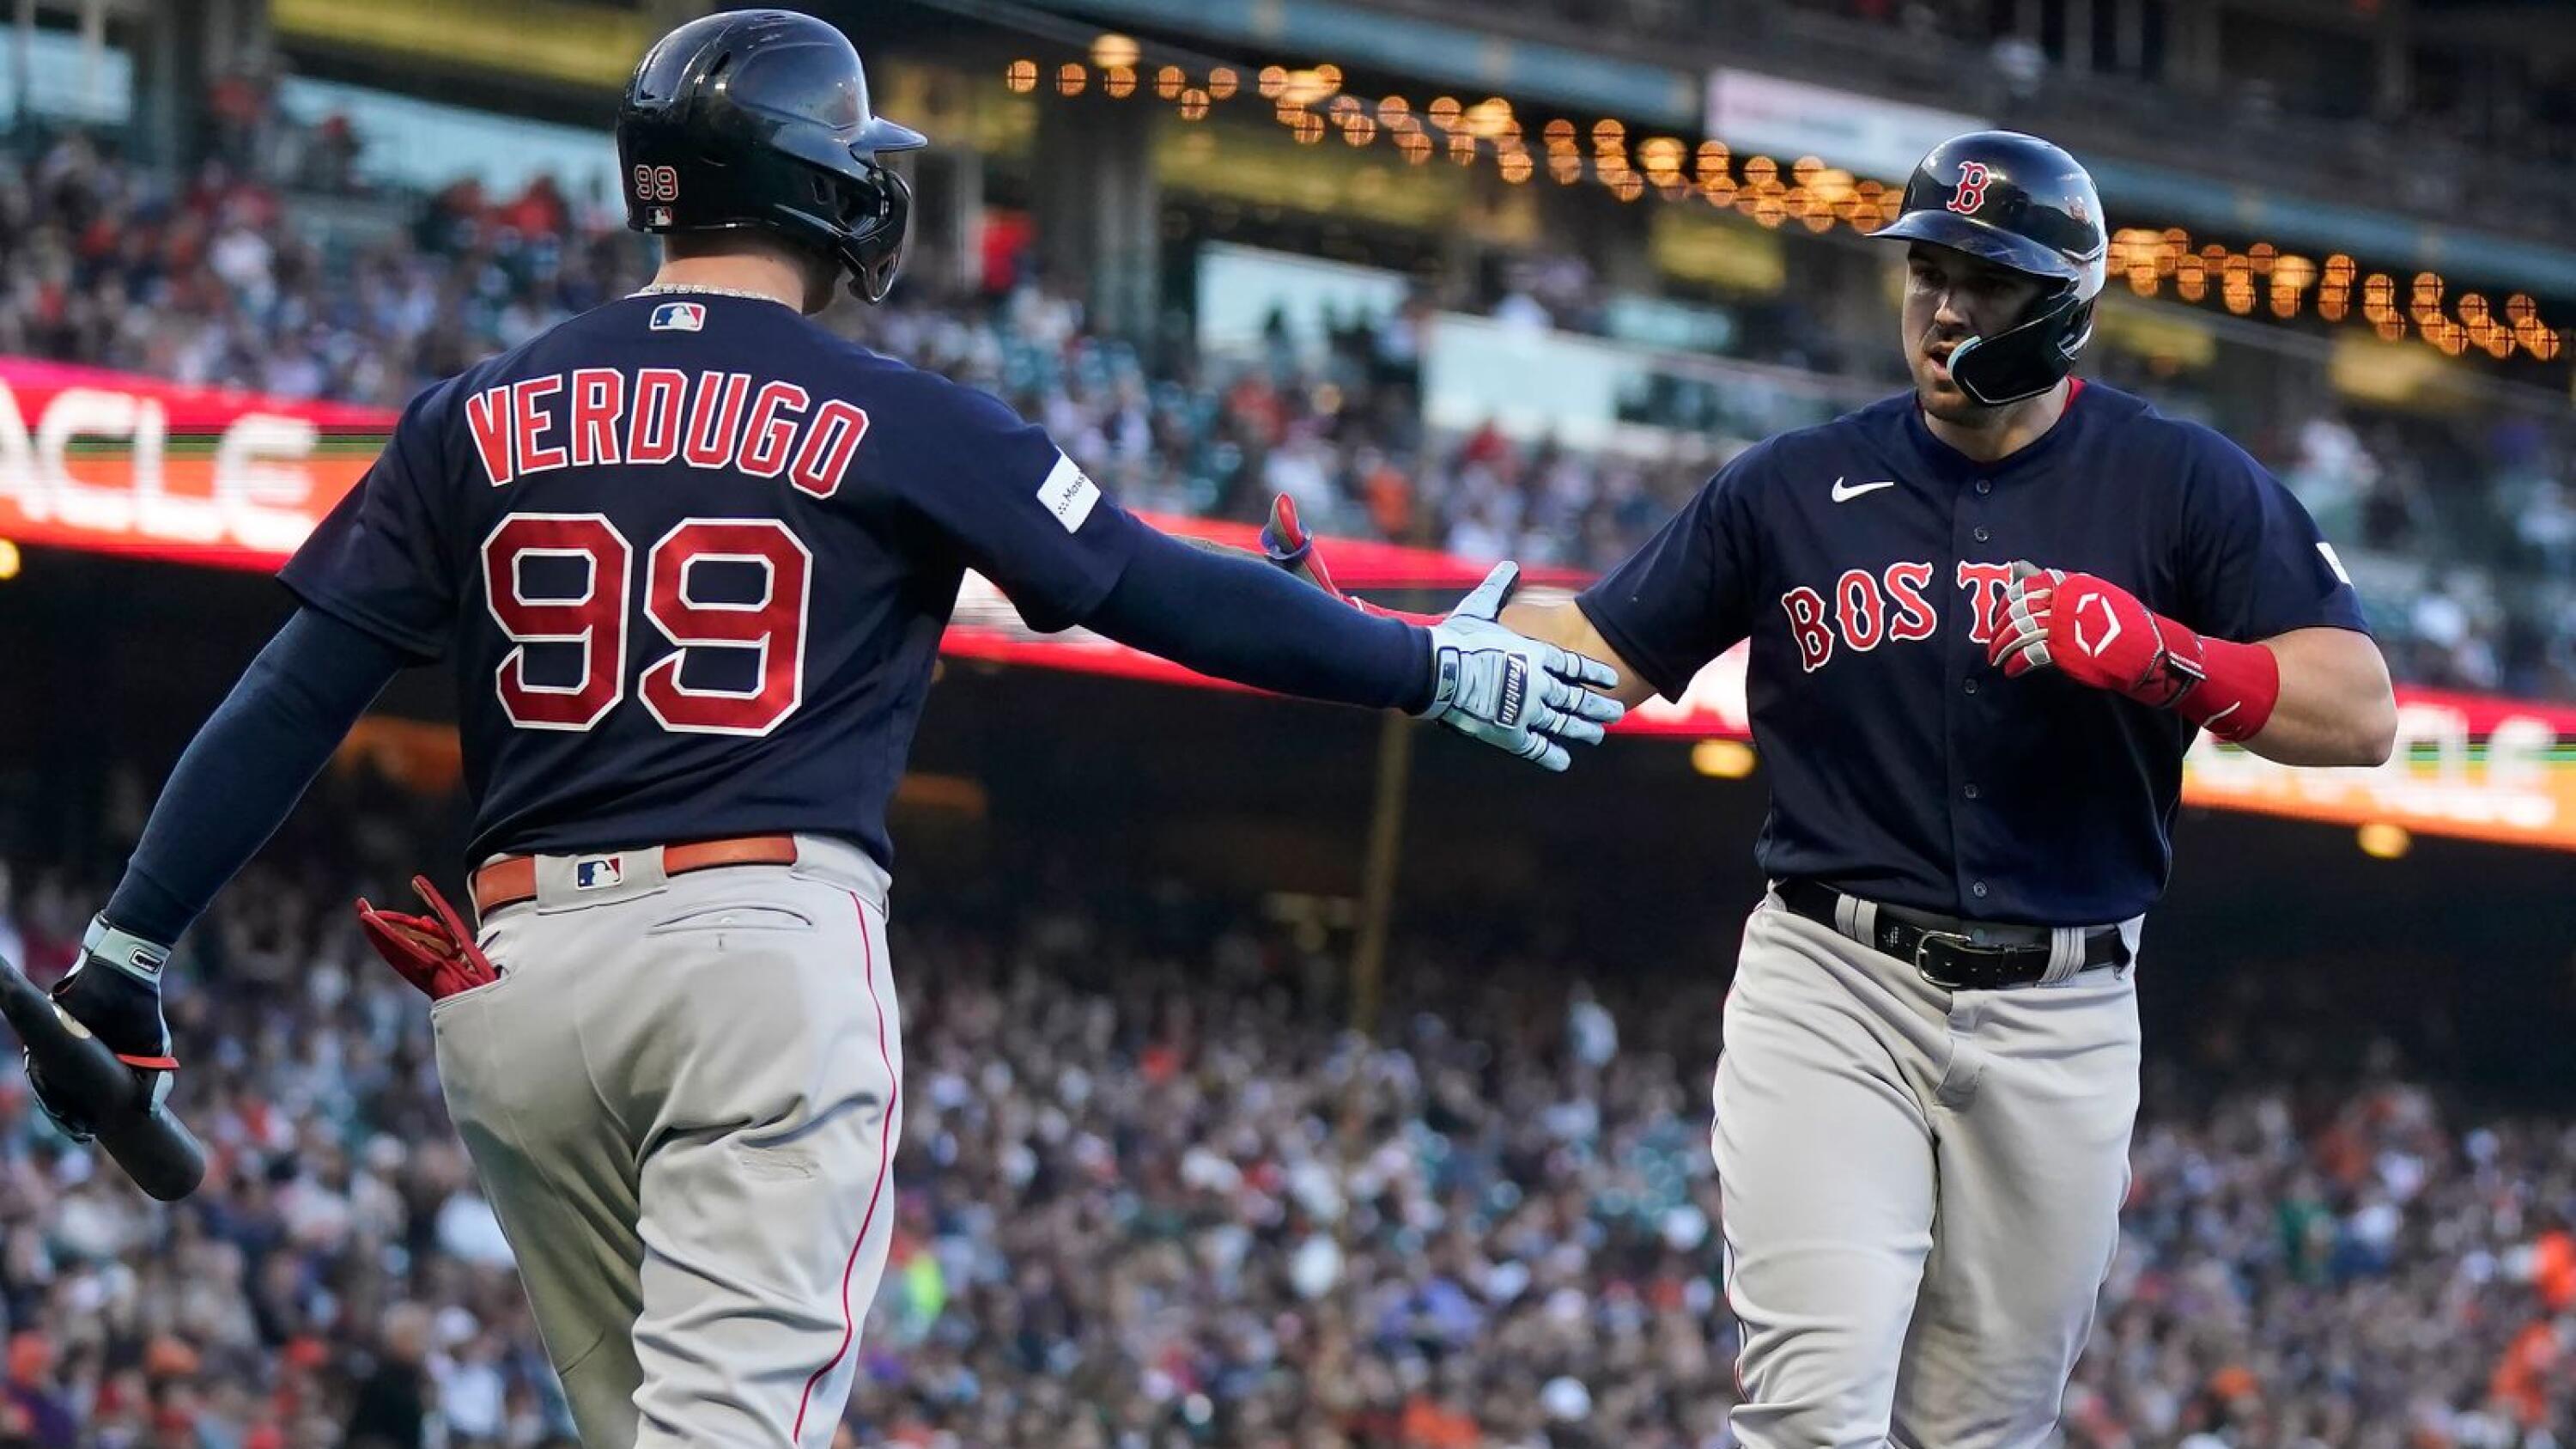 Triston Casas homers to lead Red Sox past Giants 3-2 for fifth straight win